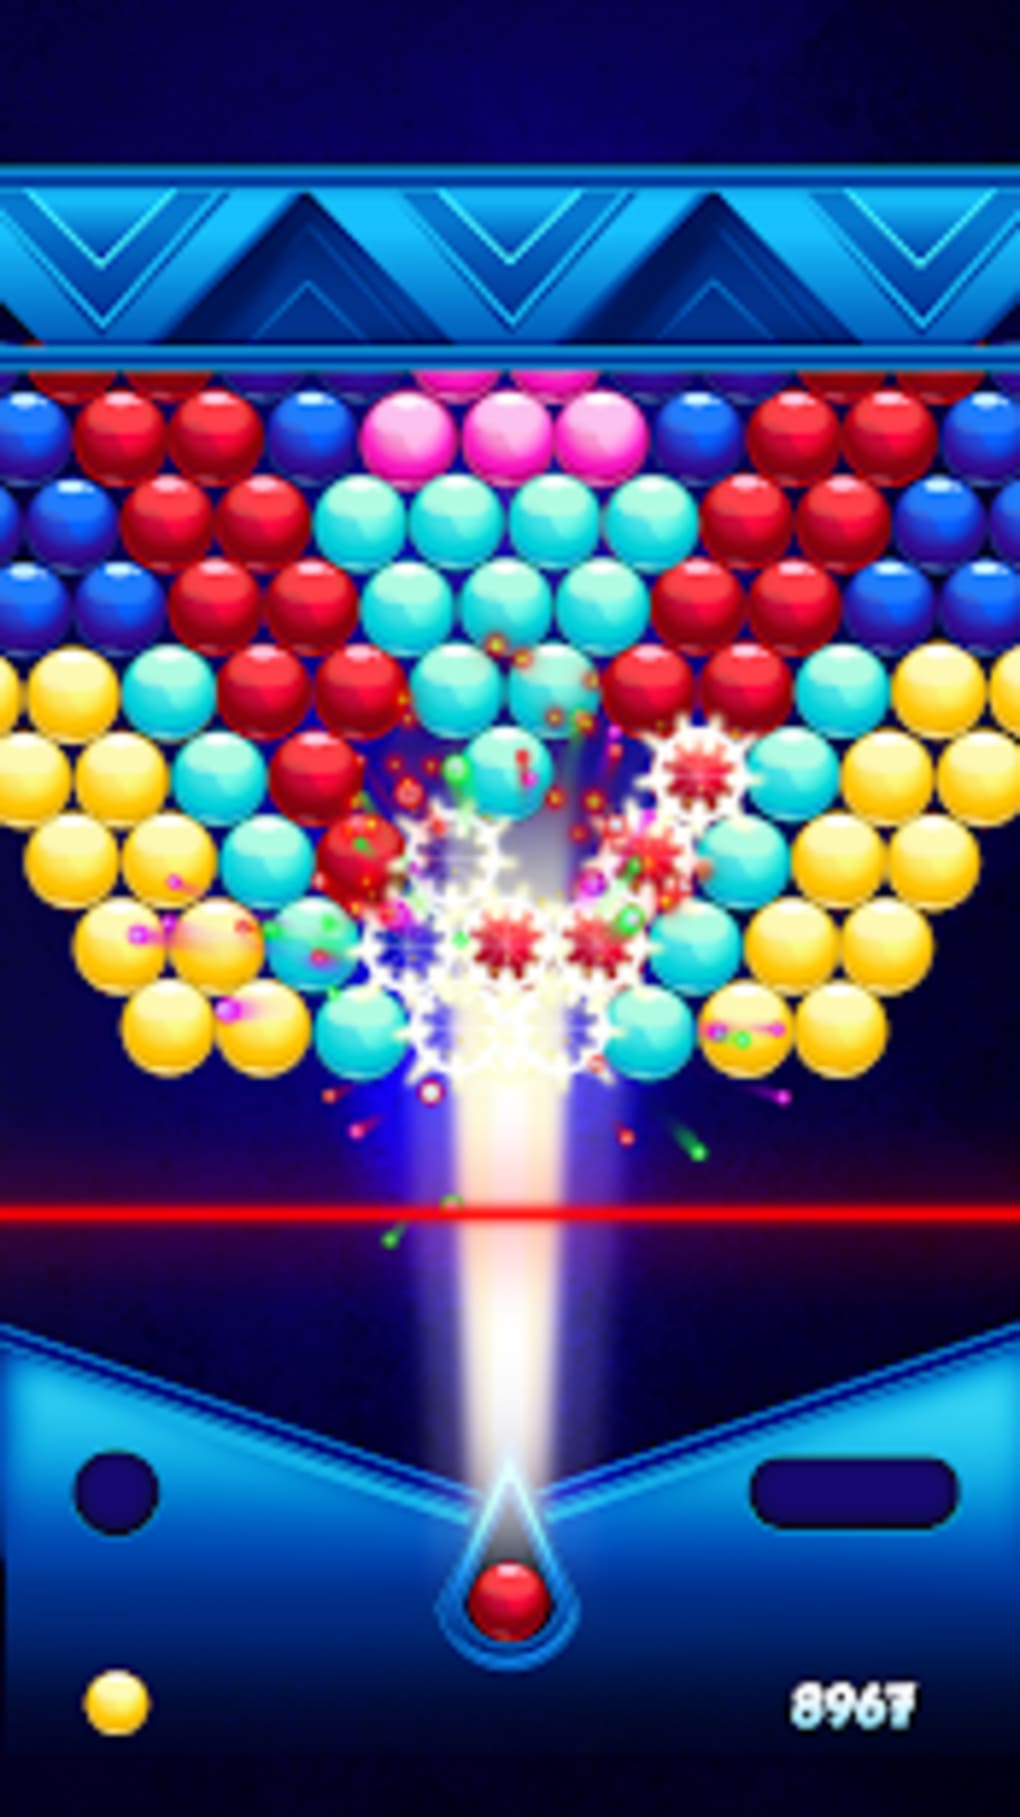 bubble trouble game download